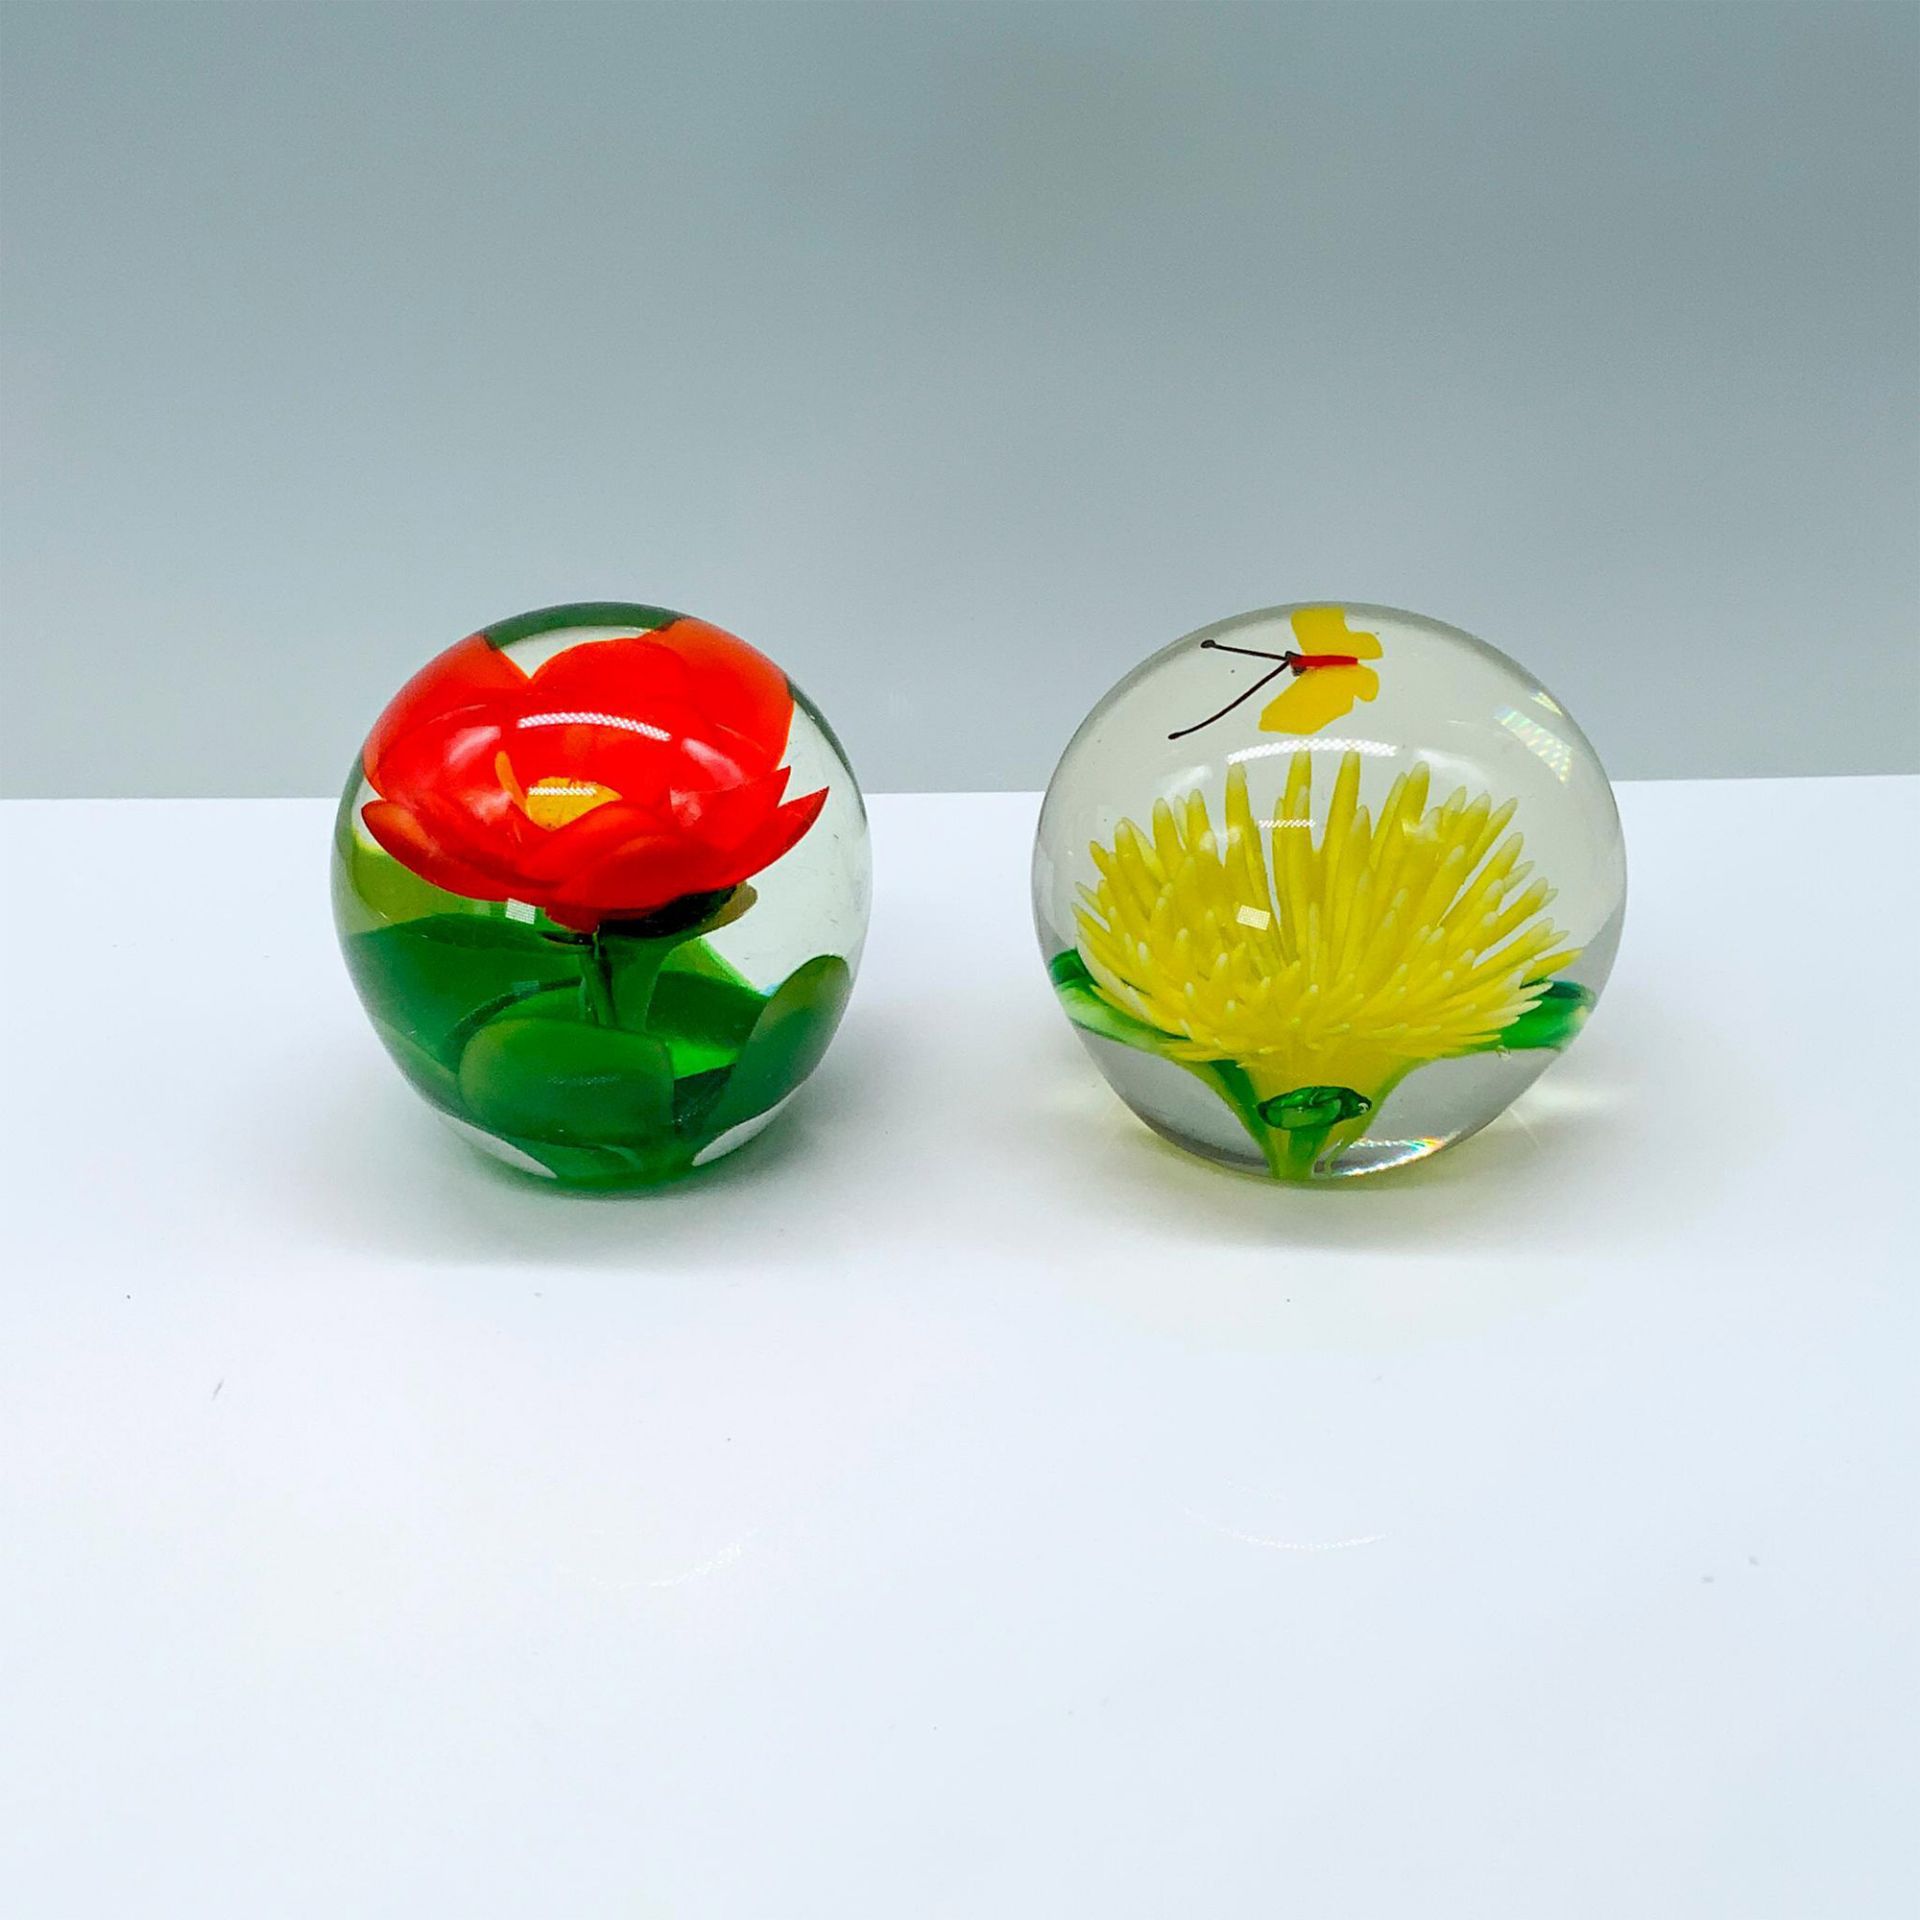 2pc Floral Motif Art Glass Paperweights - Image 2 of 3